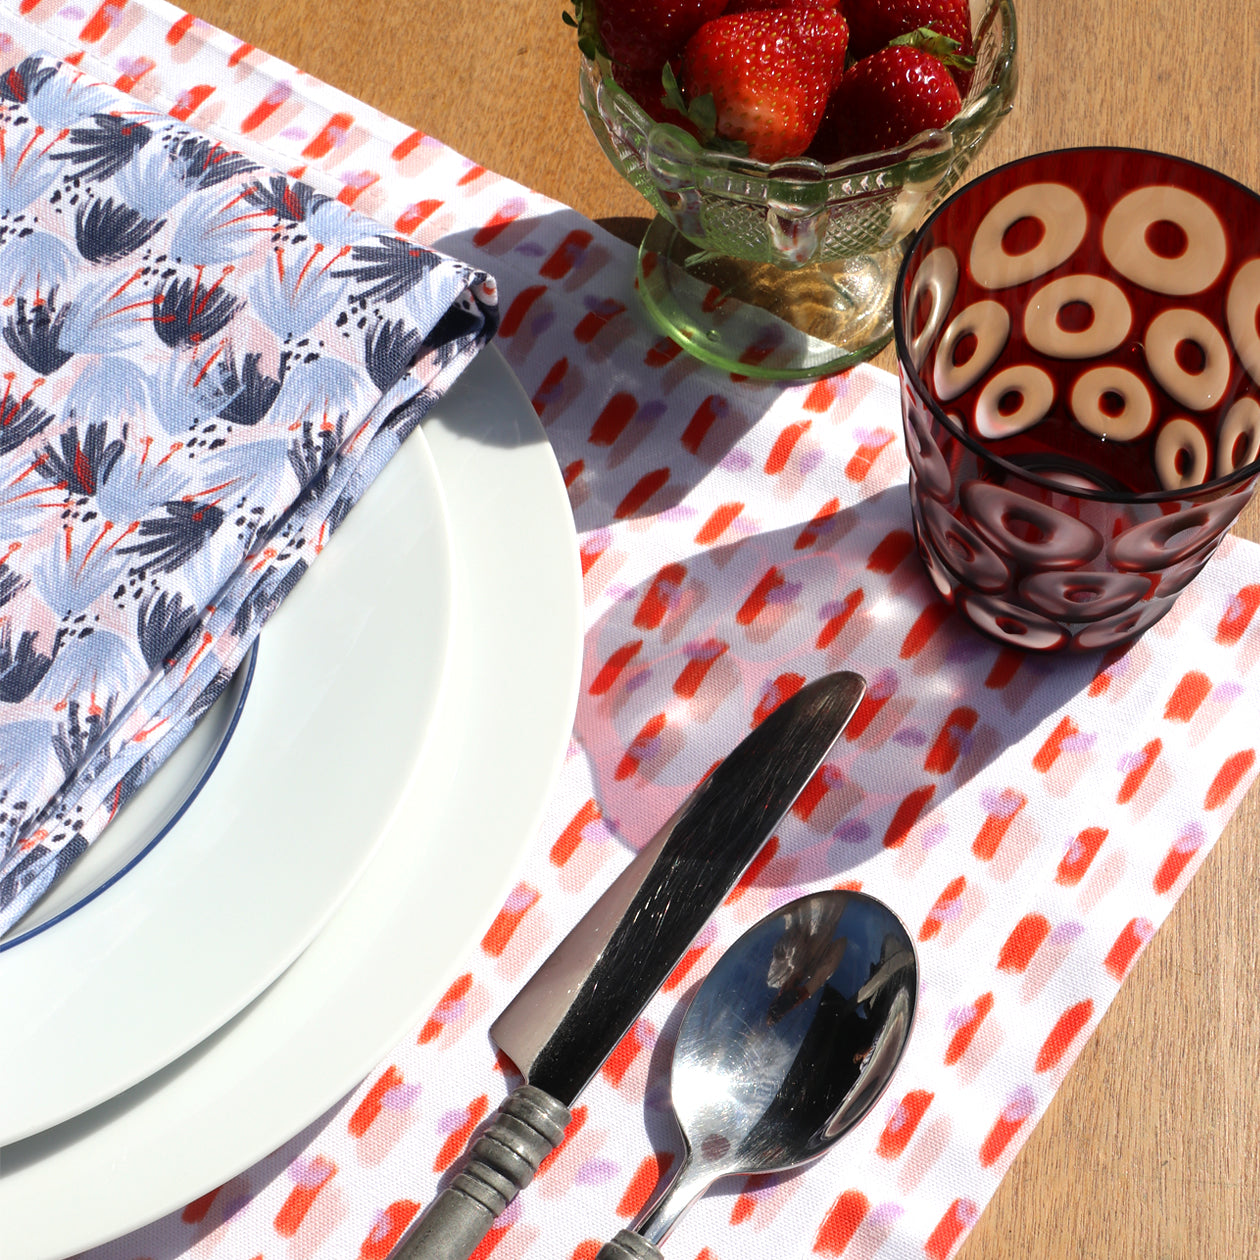 Light Pink Placemat close-up with red and blue printed napkin on top of two white plates by silverware and red glass by cup of strawberries